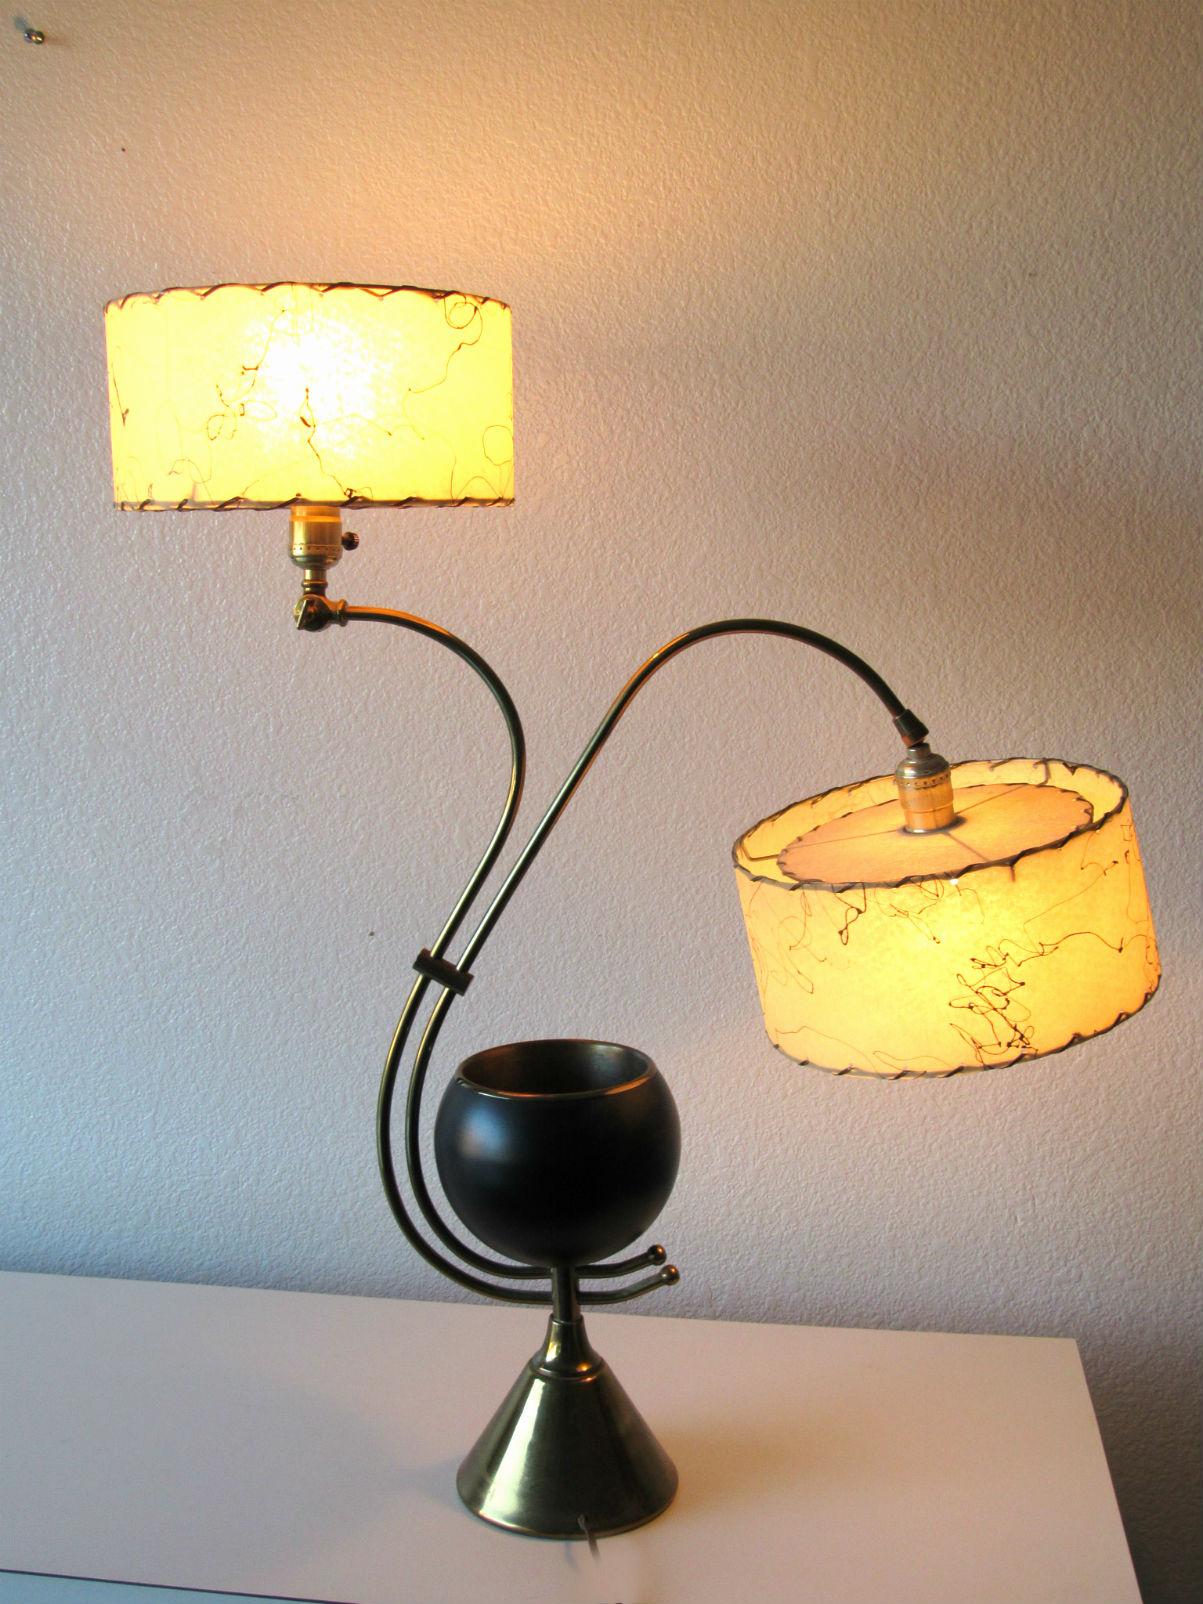 Atomic Age Majestic Adjustable Lamp with Two Original Fiberglass Shades. This wonderful lamp was lovingly cared for in one home since its purchase in the 1950s and is in remarkable condition. Made of brass with a black enameled center cup and